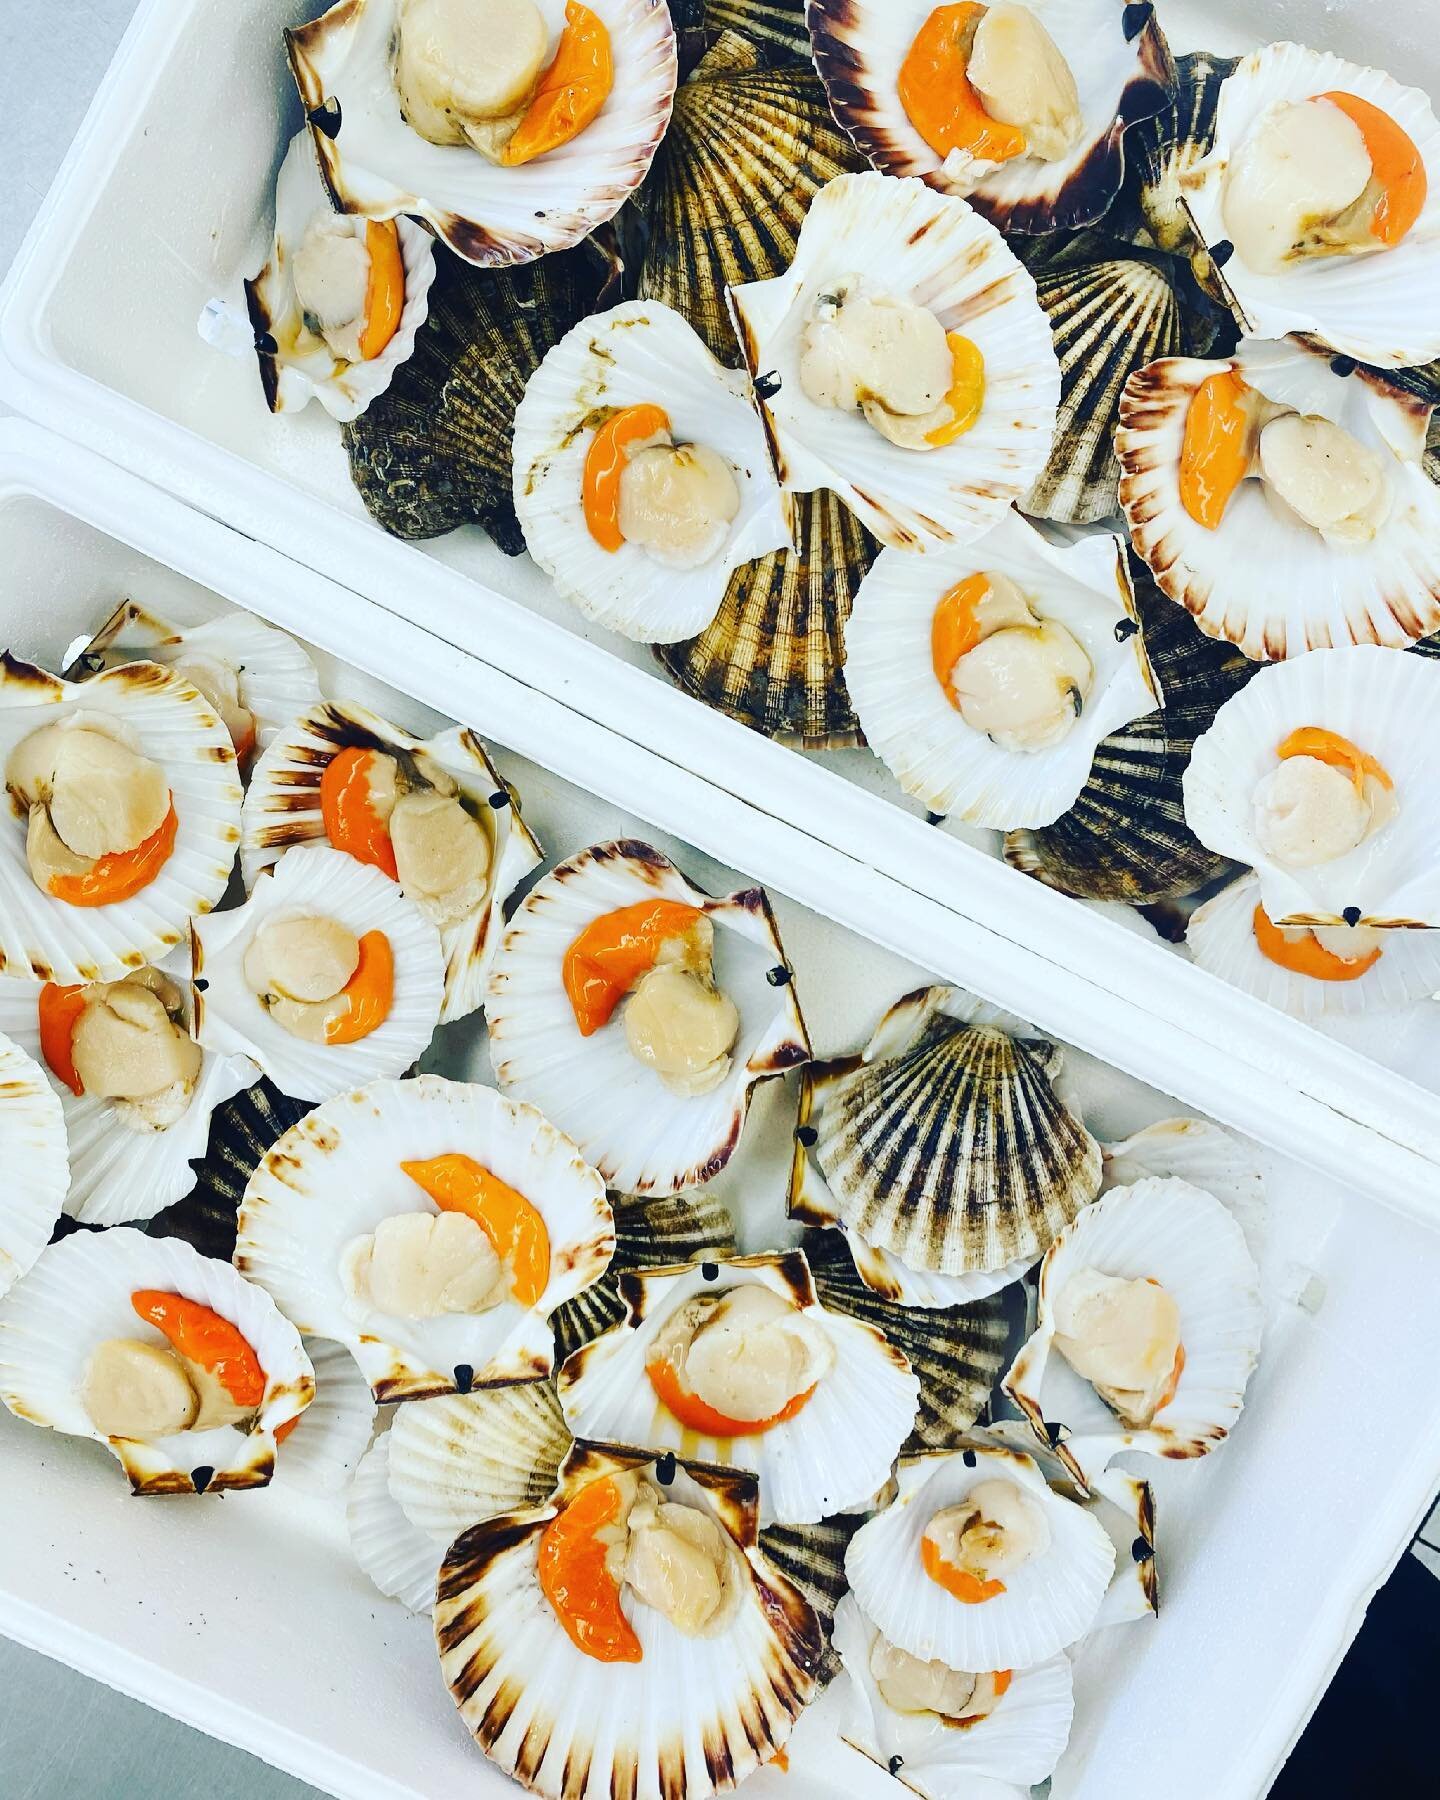 𝑅𝓎𝑒 𝐵𝒶𝓎 𝒮𝒸𝒶𝓁𝓁𝑜𝓅𝓈

Delivered to our door, now prepped &amp; ready for today;  our first wedding of the season ! So exciting &amp; loads more pictures to follow later !
@chapmans_fish 

#scallops 
#weddingsofinstagram
#weddingseason
#wedd